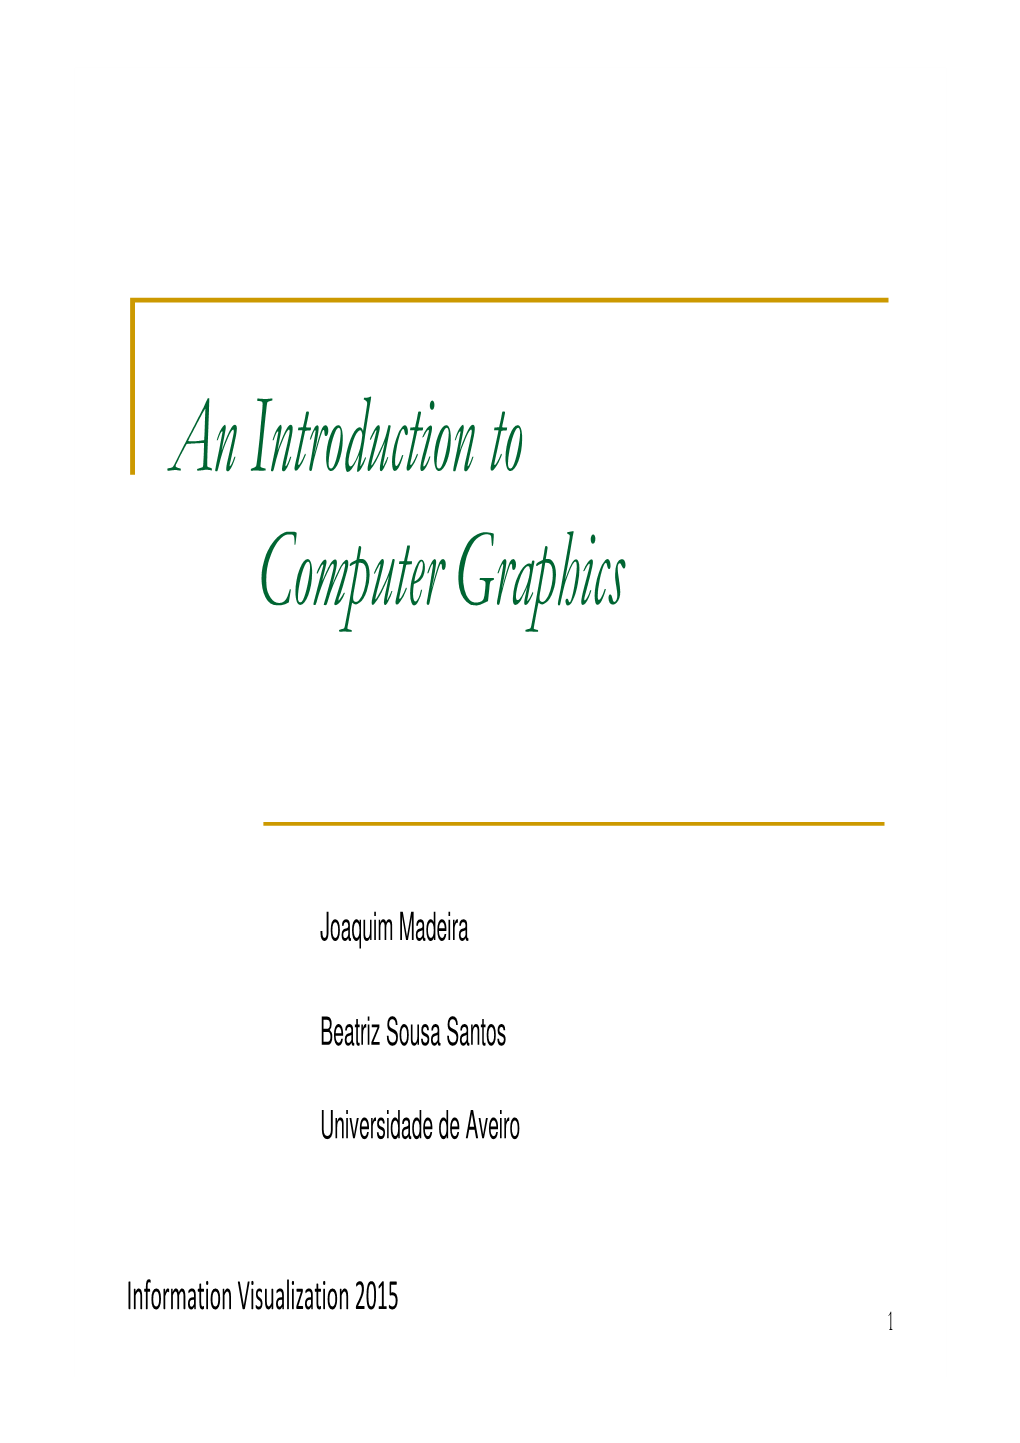 An Introduction to Computer Graphics